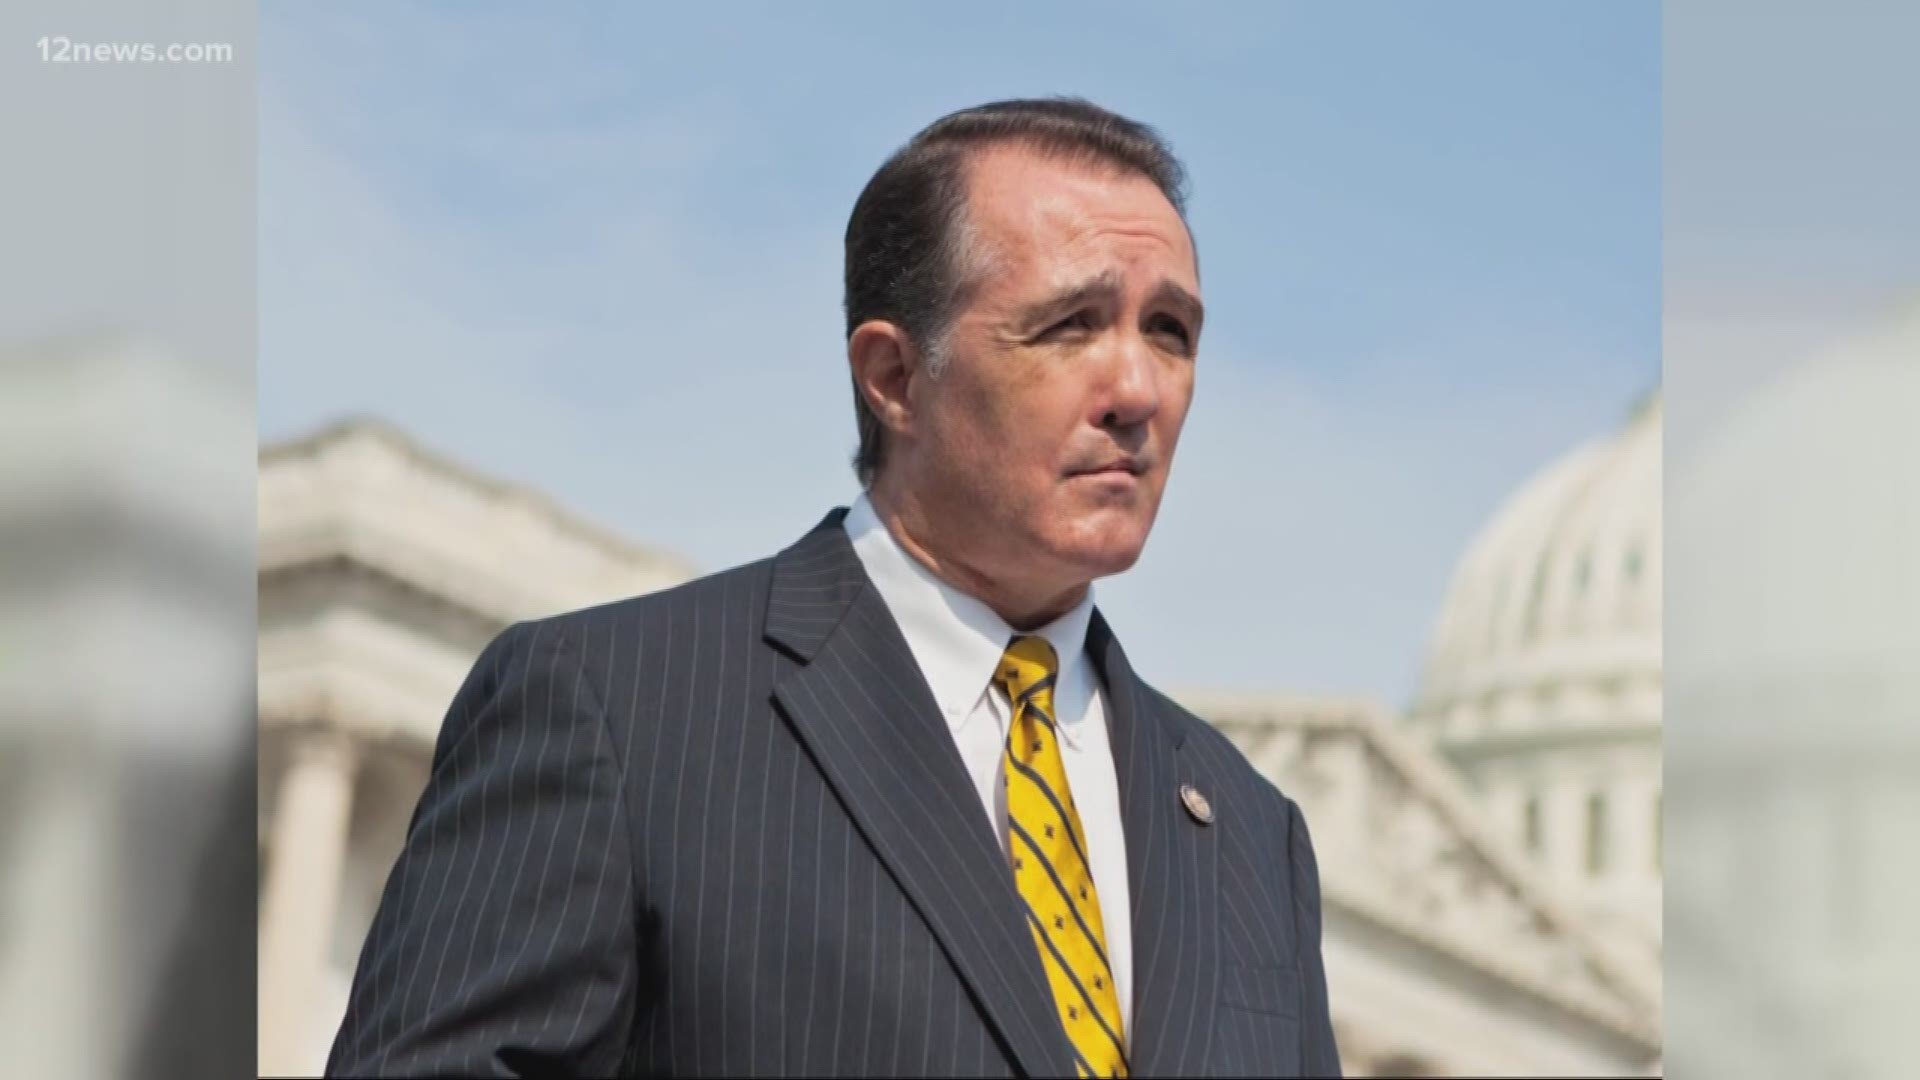 Congressman Rep. Trent Franks is expected to step down amidst rumors of "inappropriate behavior."